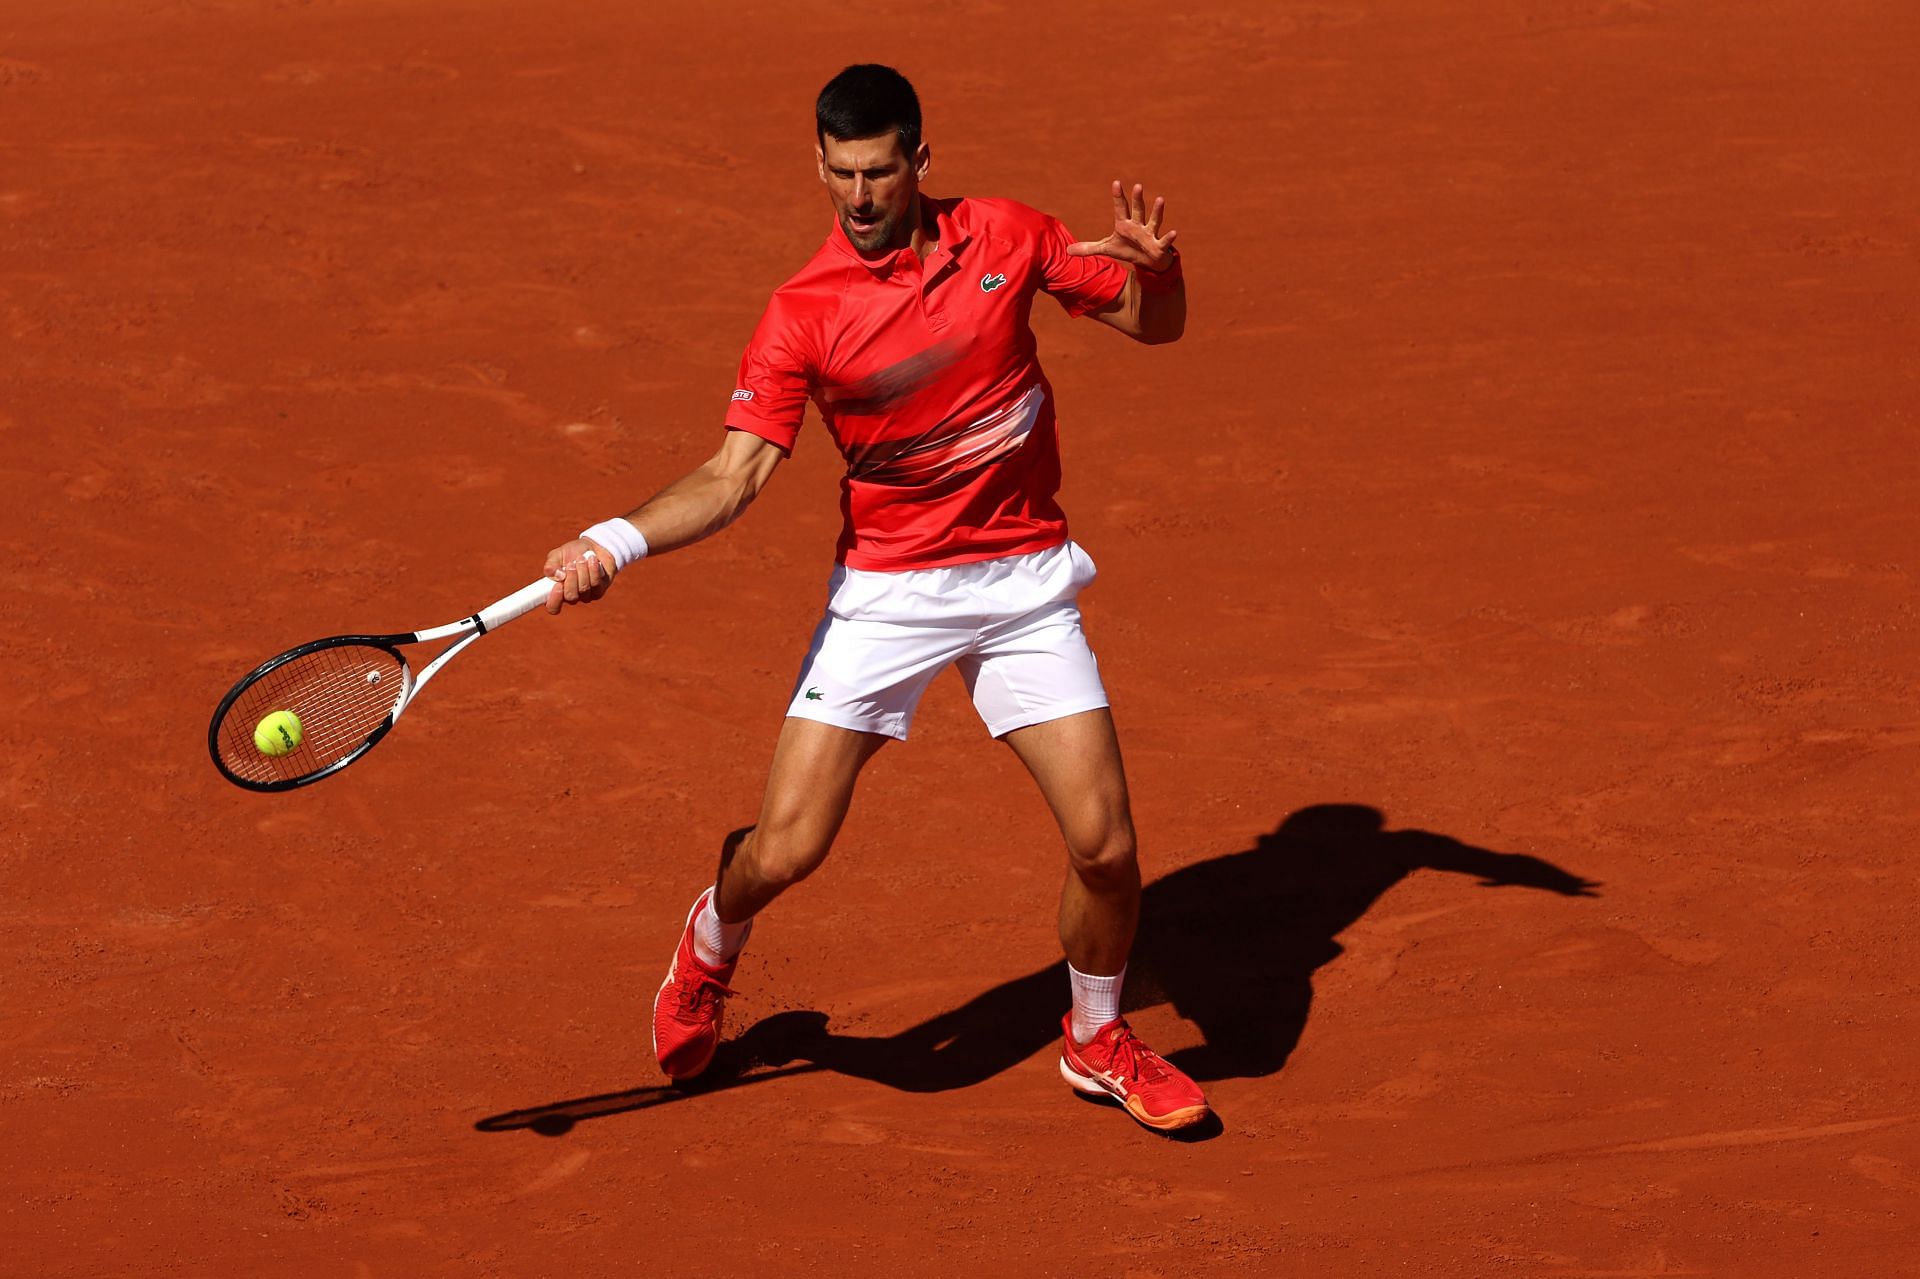 Novak Djokovic in action at 2022 French Open.